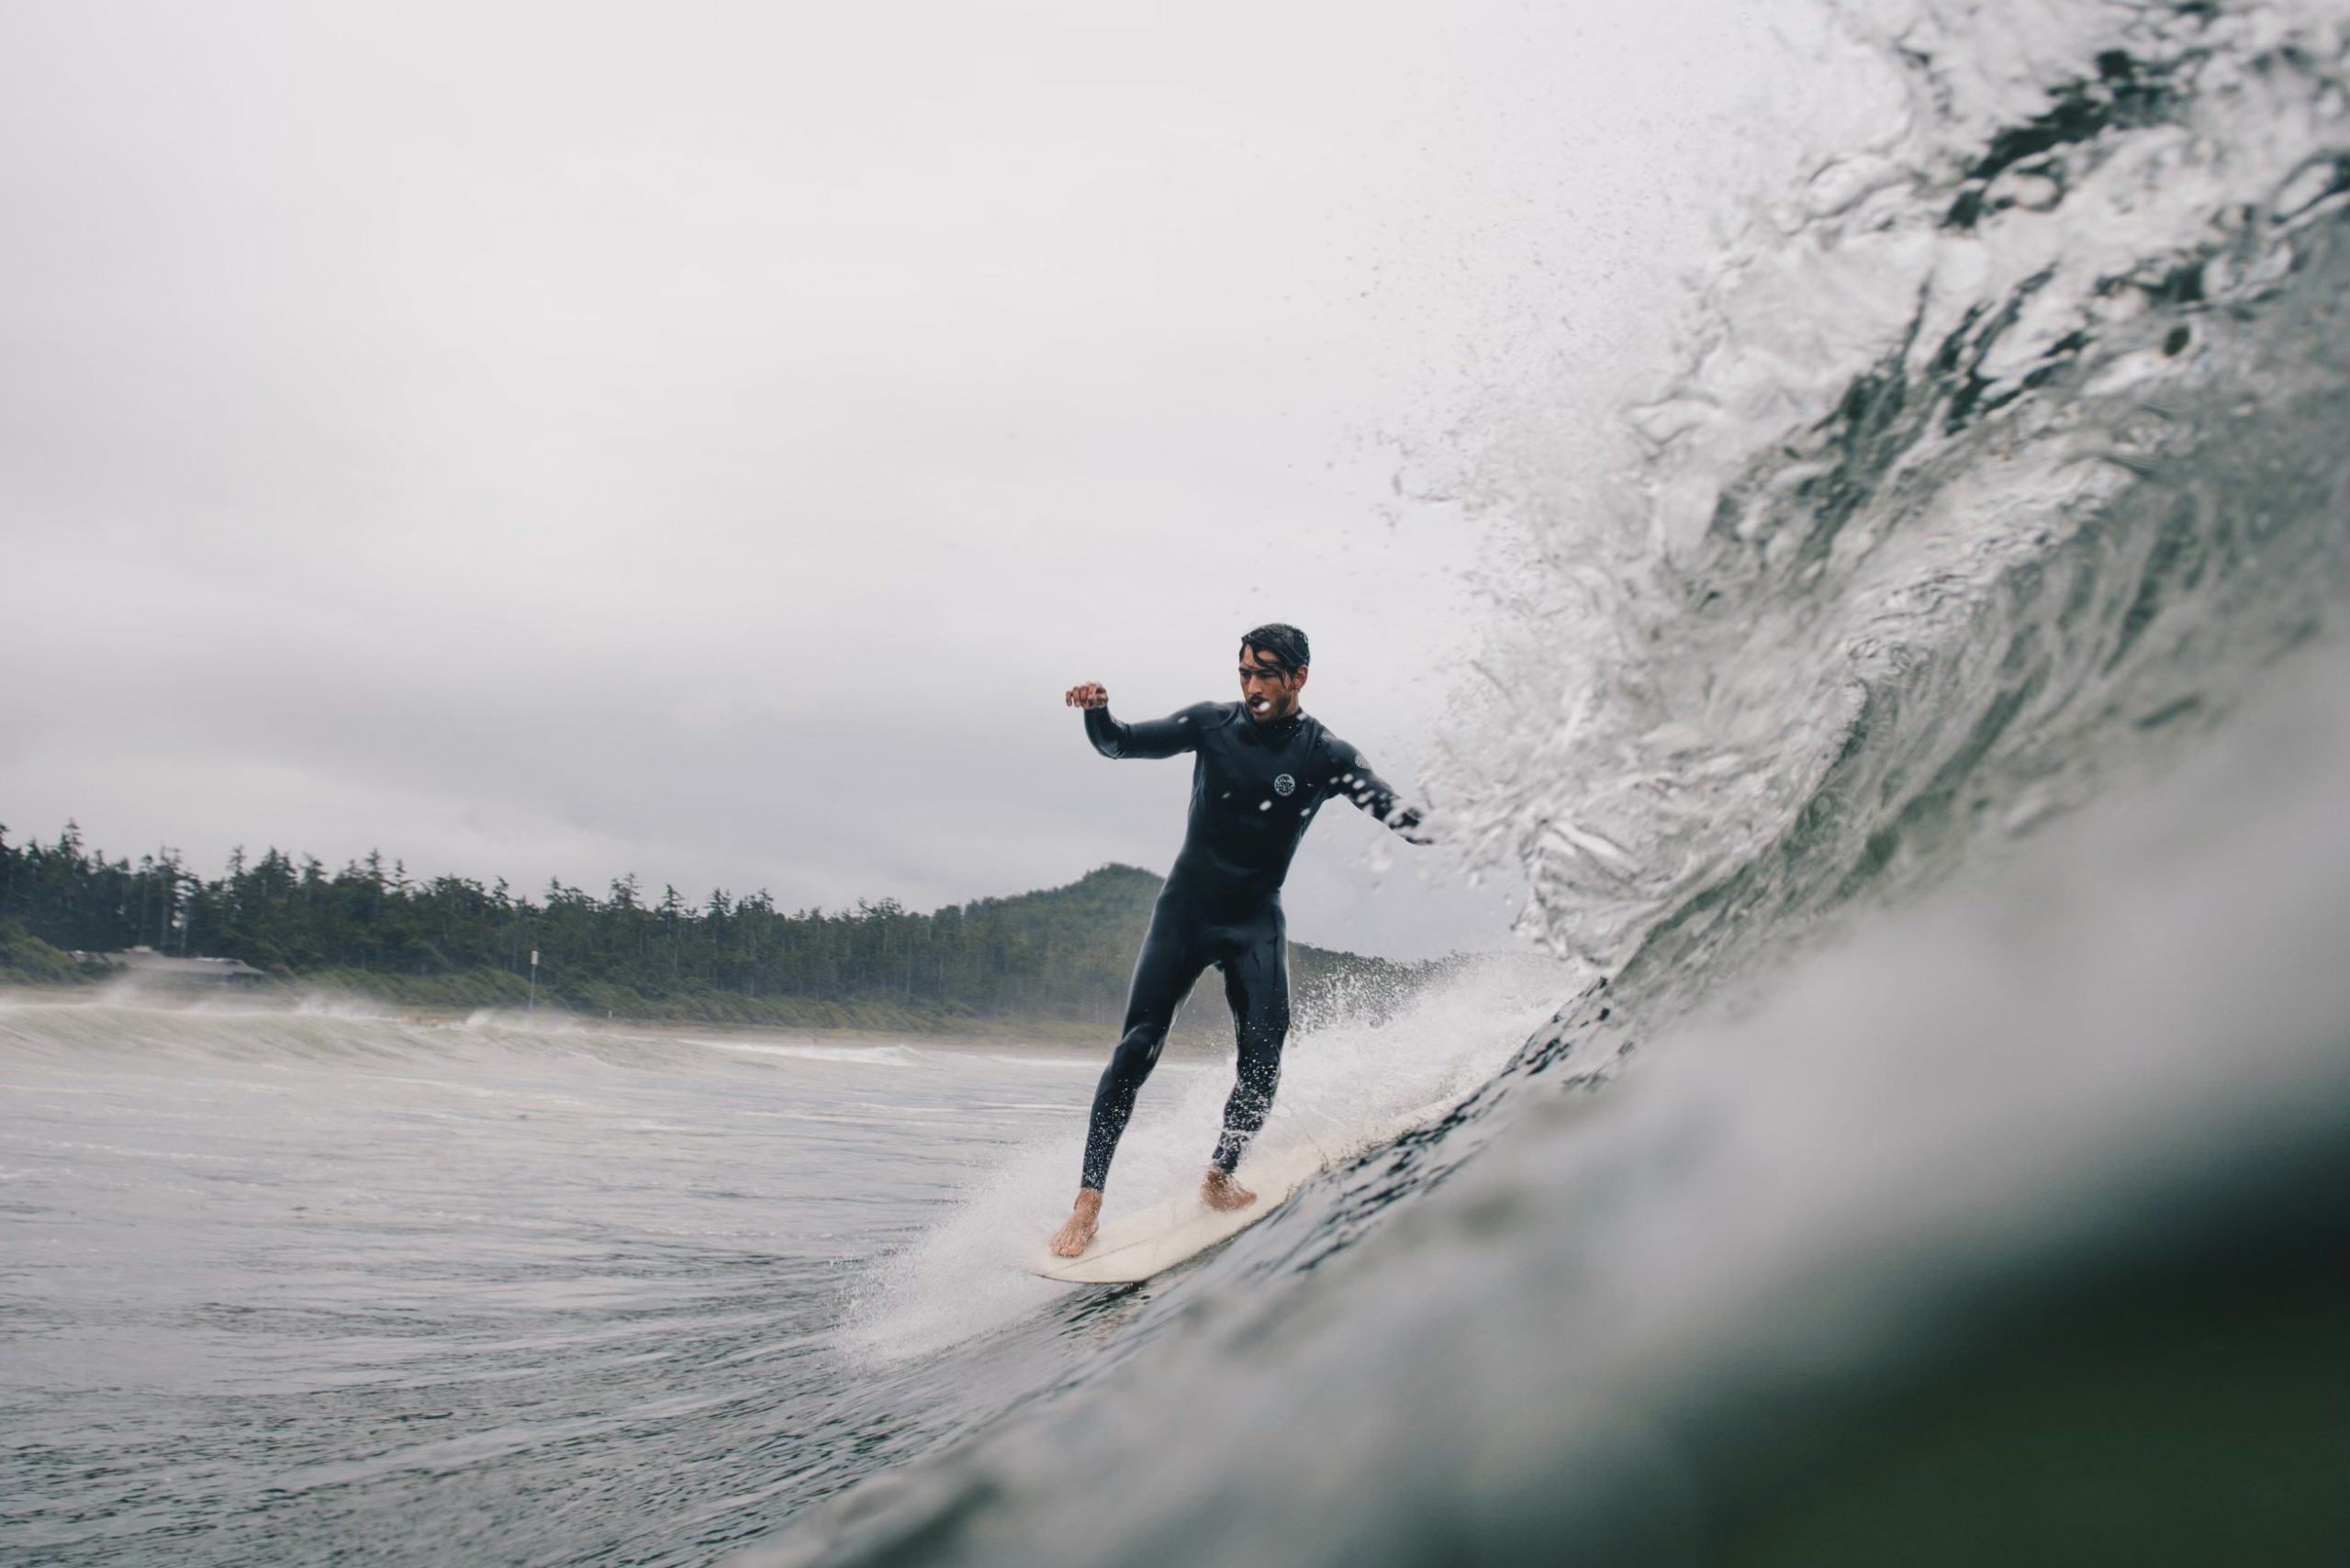 Tofino, BC: As West as it gets